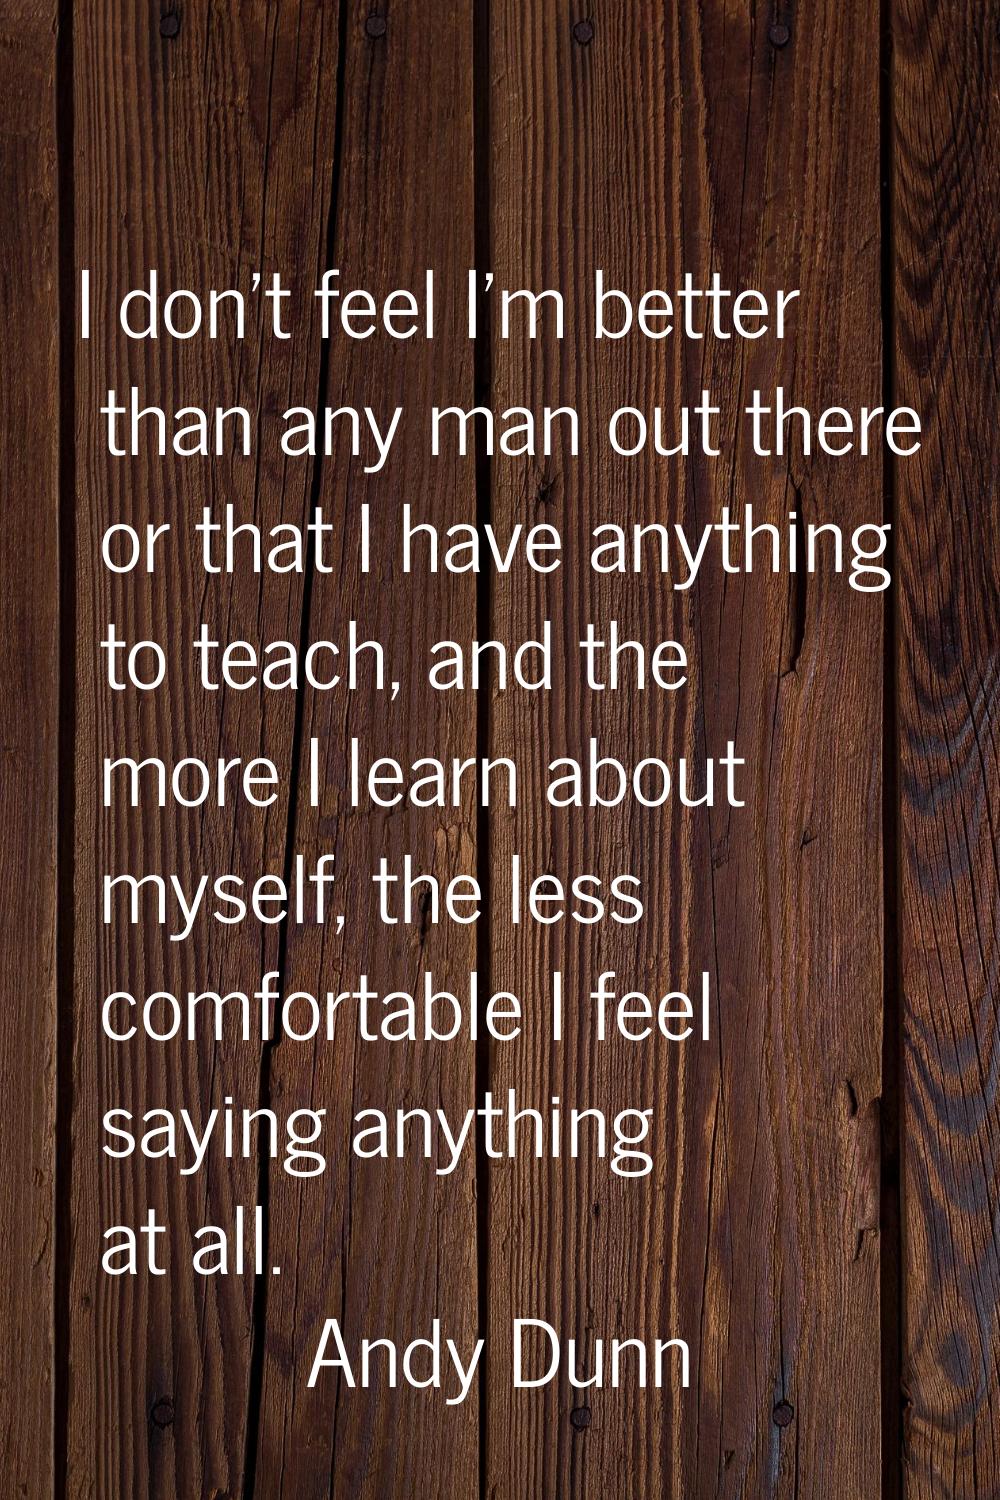 I don't feel I'm better than any man out there or that I have anything to teach, and the more I lea